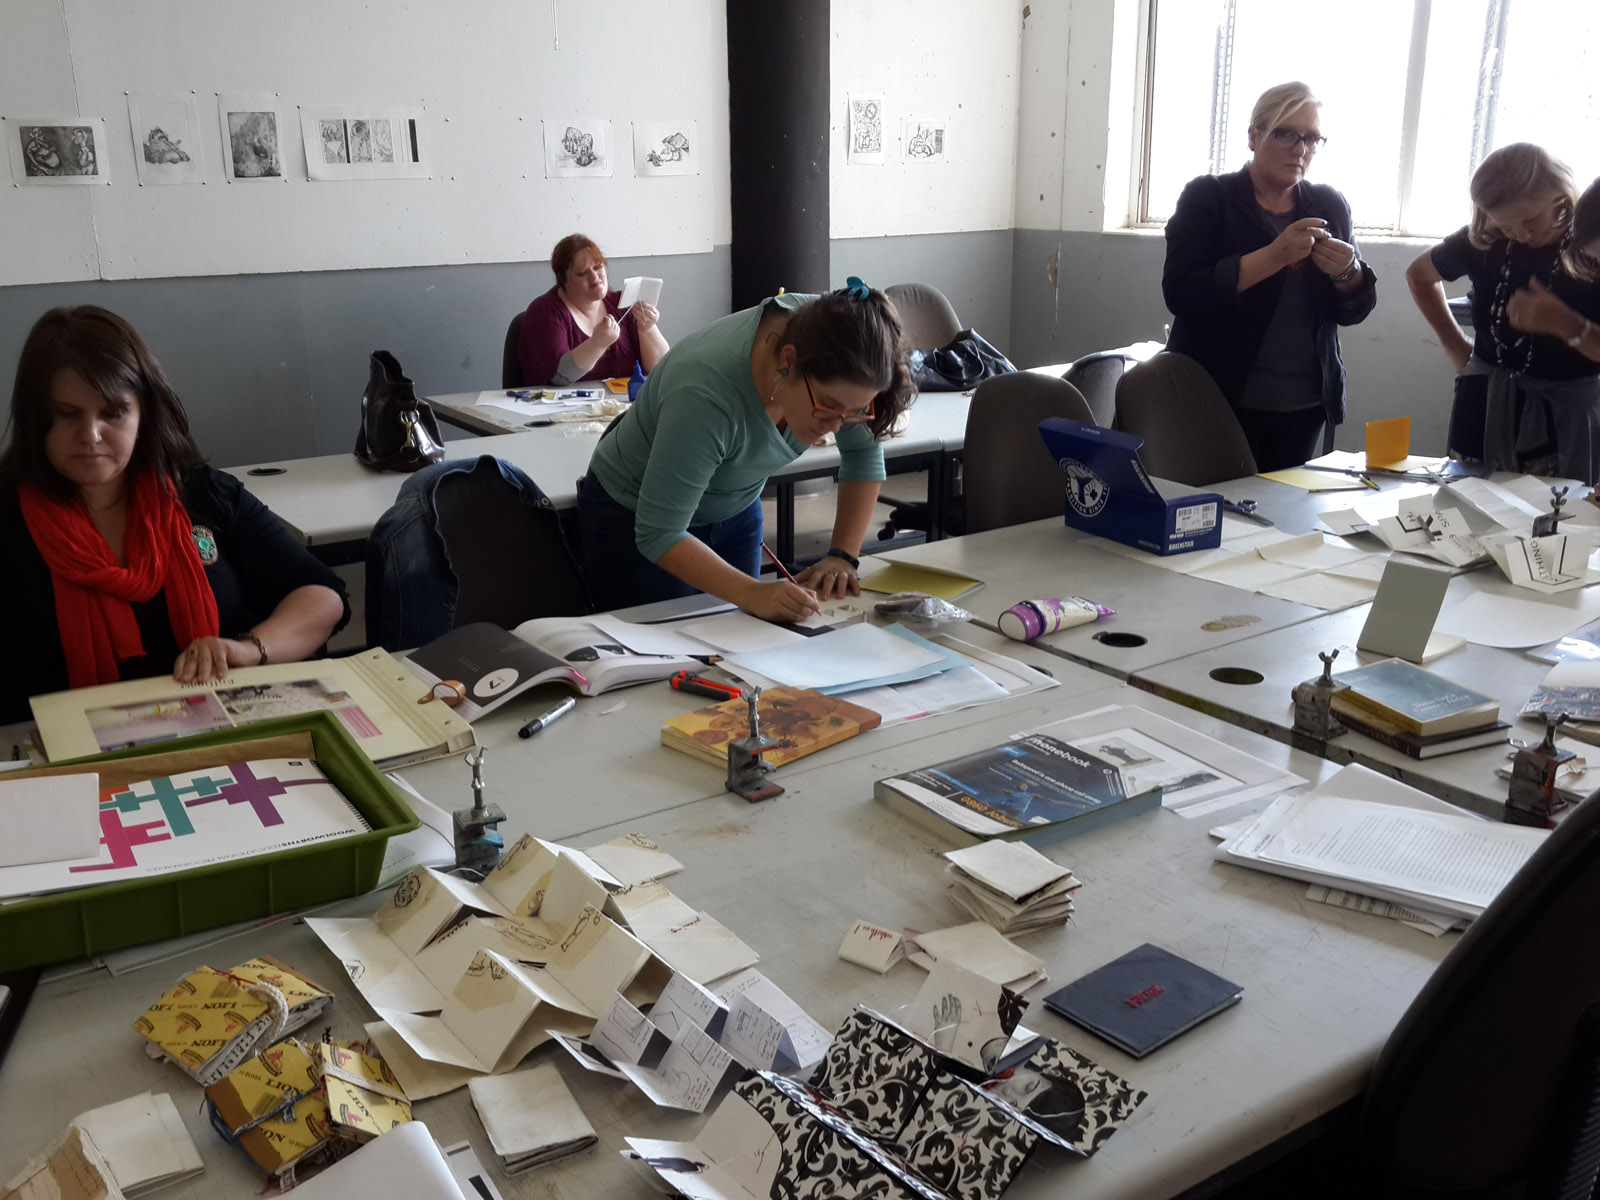 Click the image for a view of: Art Educators Workshop. Sunday 26 March